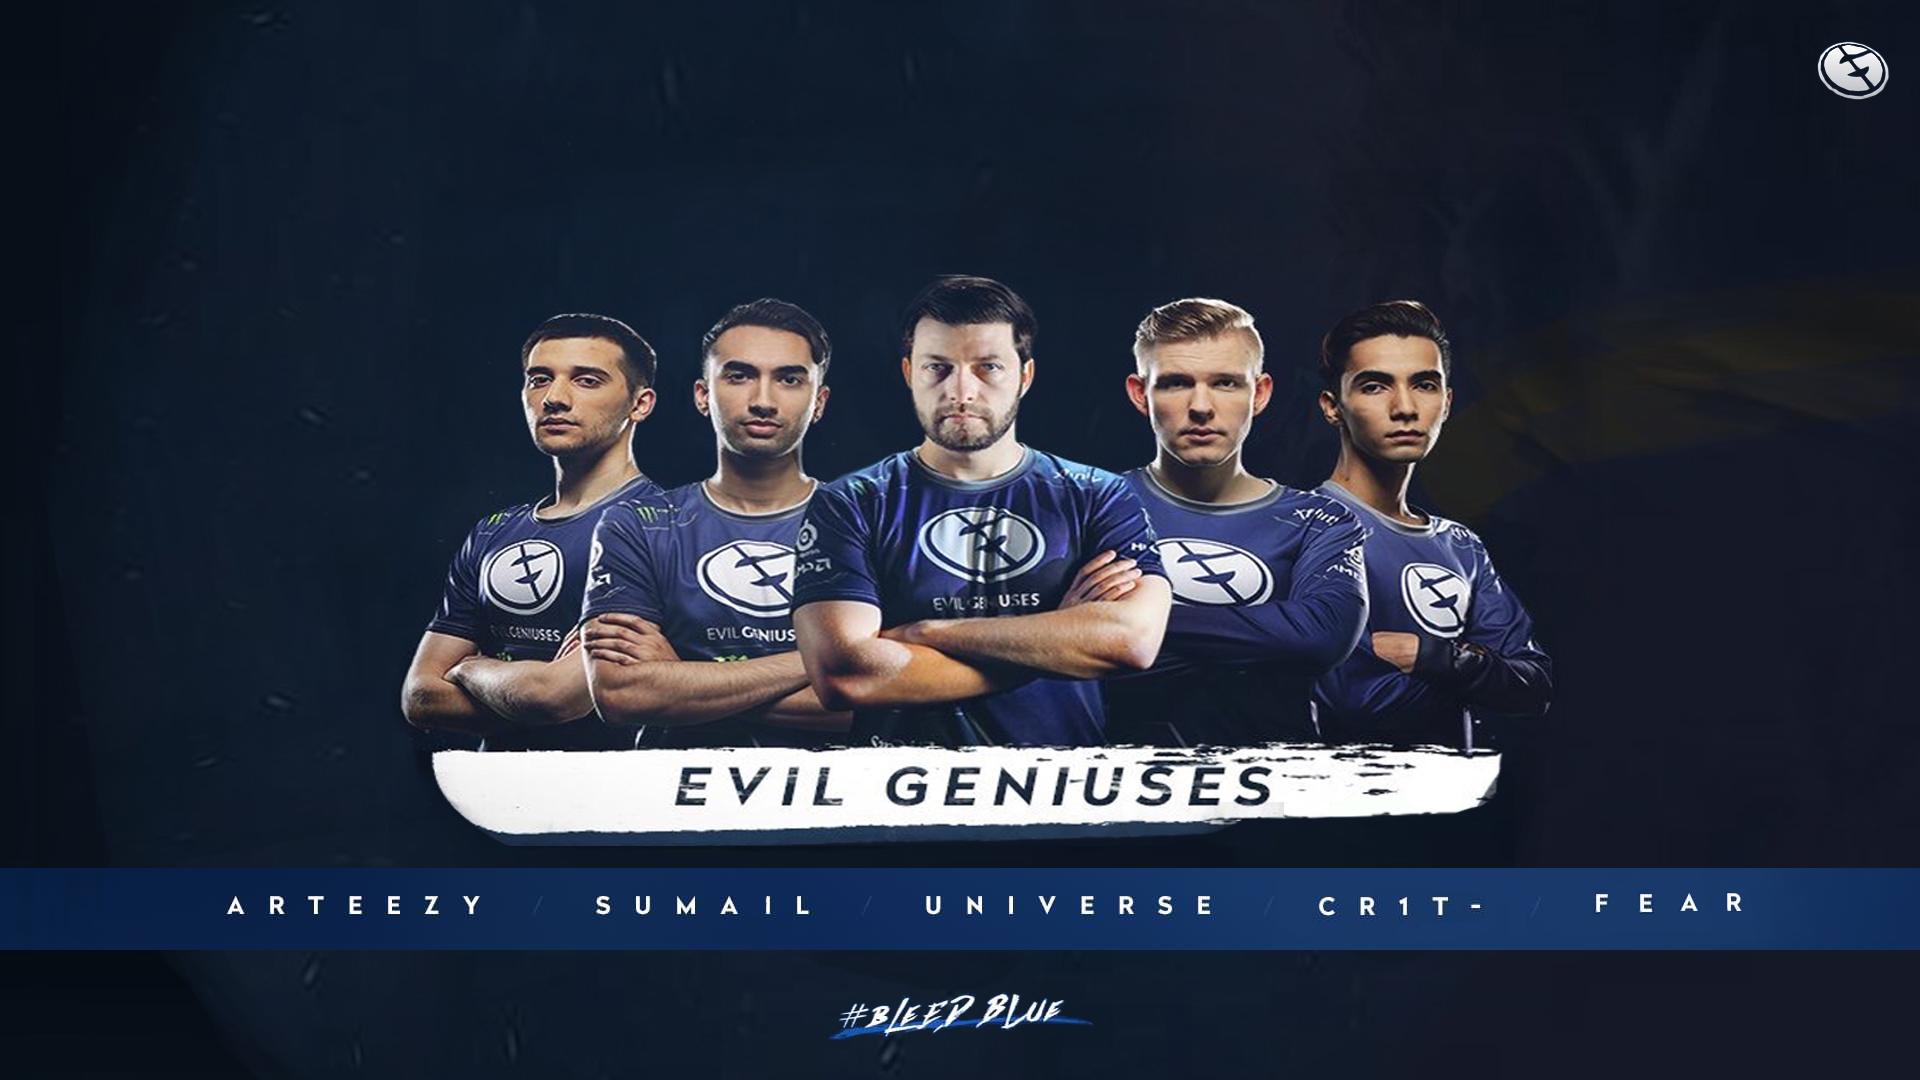 EG (Evil Geniuses) Wallpaper i made months ago when they sucked